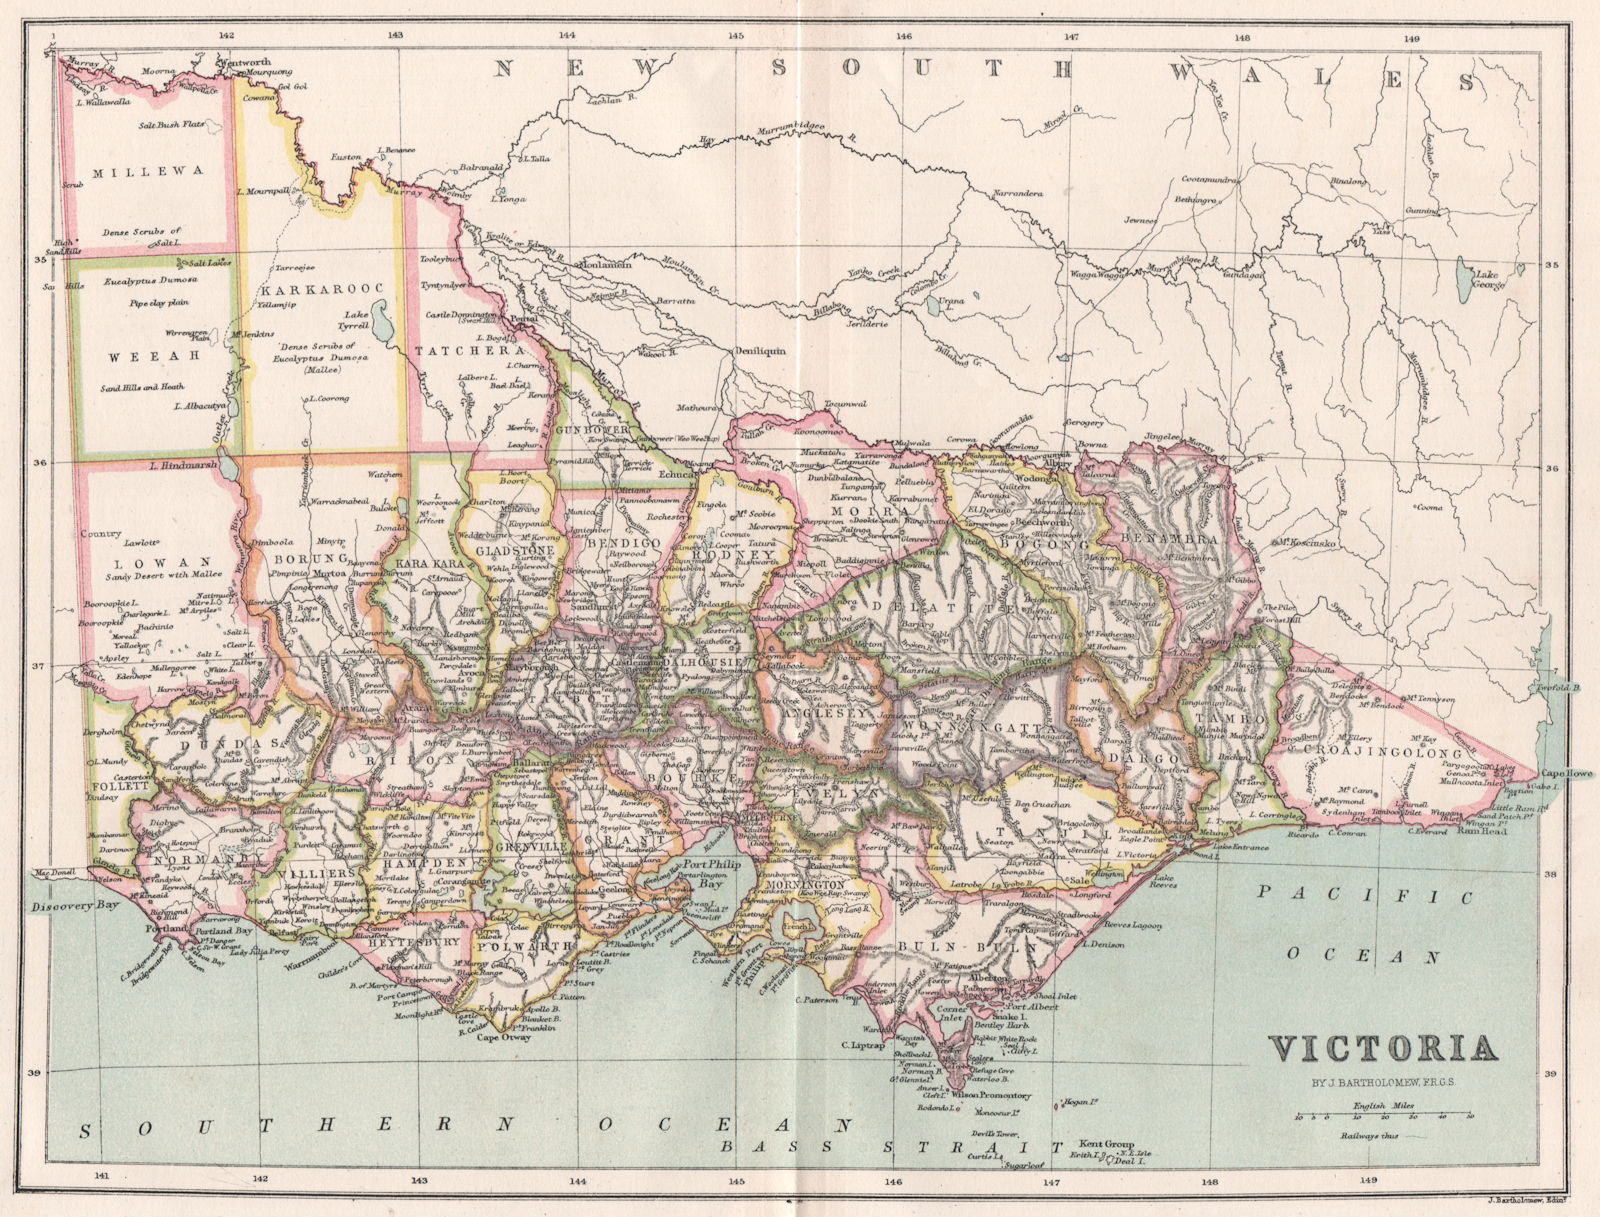 Associate Product Victoria, Australia. State map showing counties. BARTHOLOMEW 1886 old